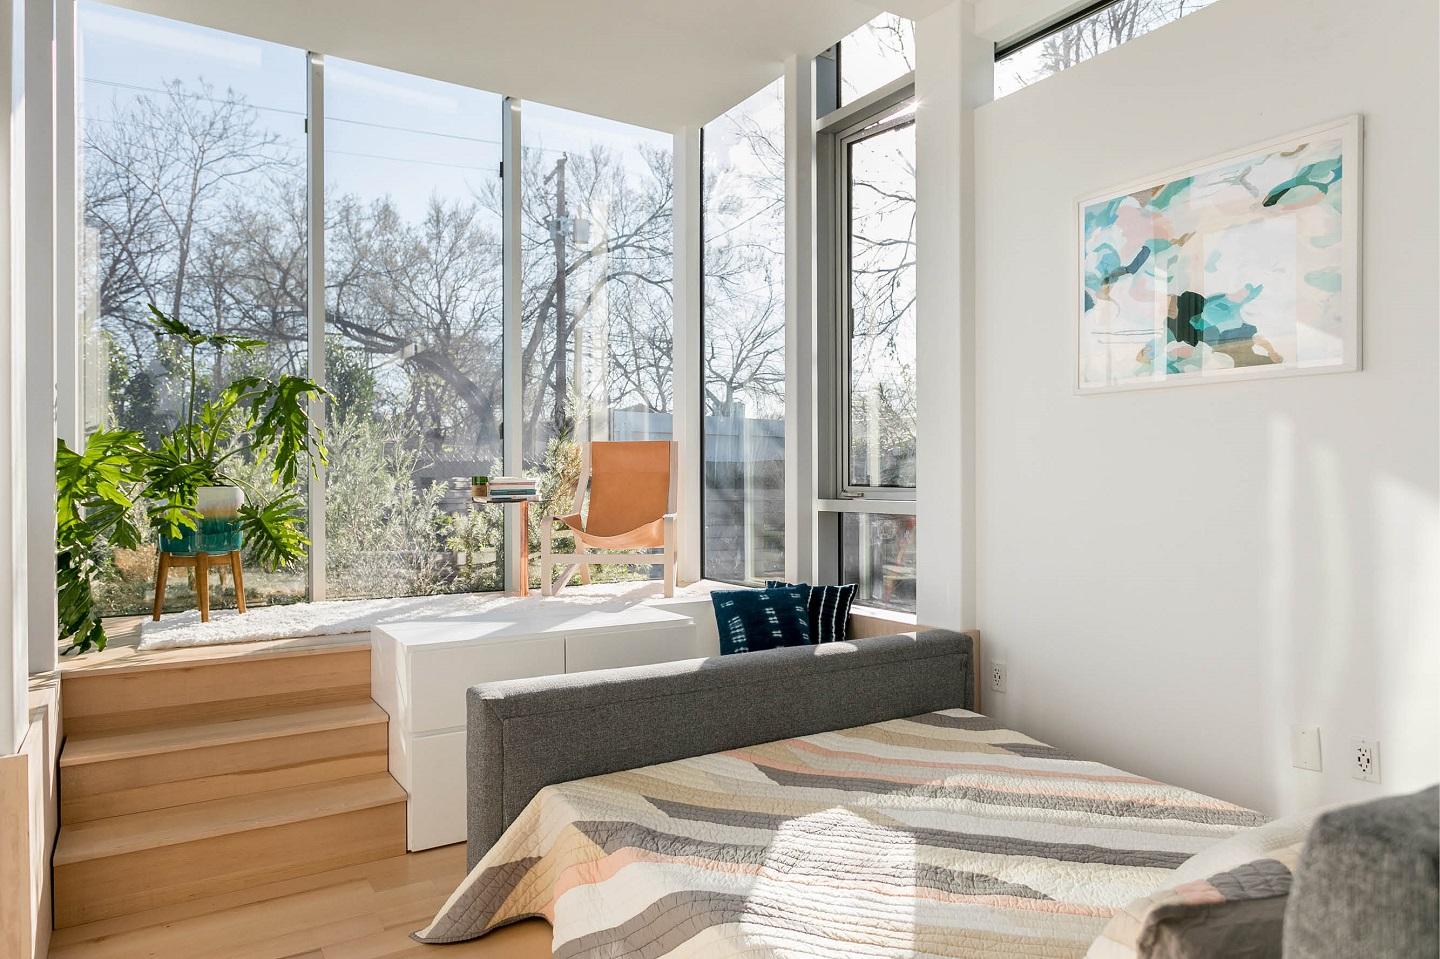 The compact space allows you to enjoy limitless sunshine as you wake every morning